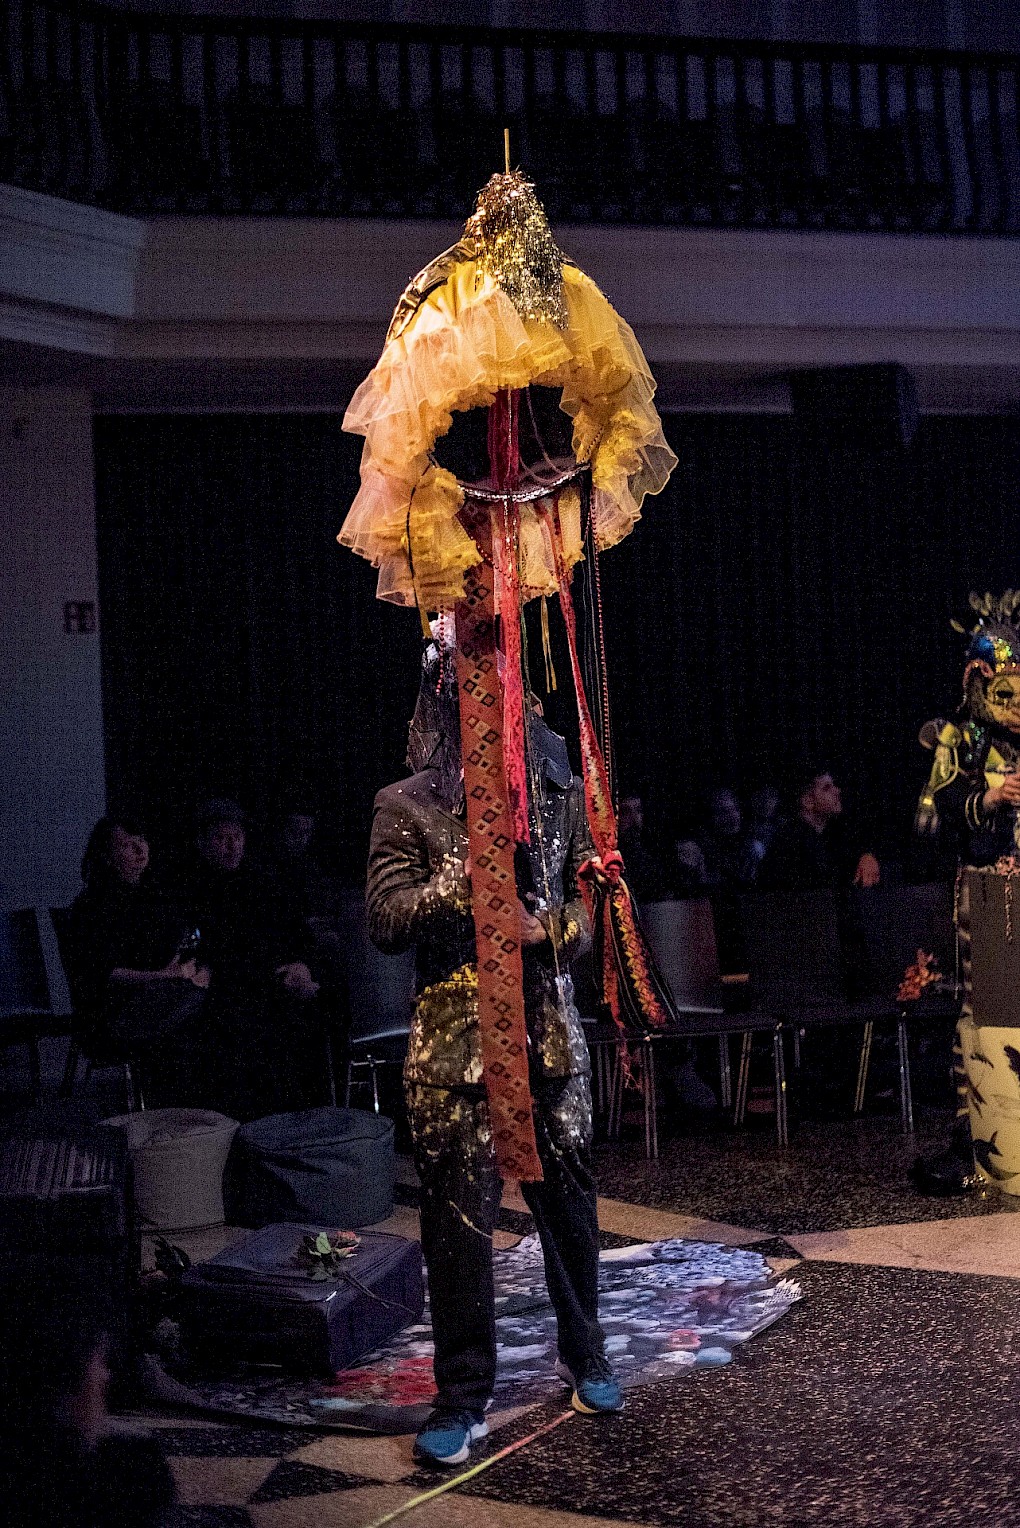 Incantations for Ecologies of Darkness: Performance by Valeria Montti Colque | Photo: Raisa Galofre